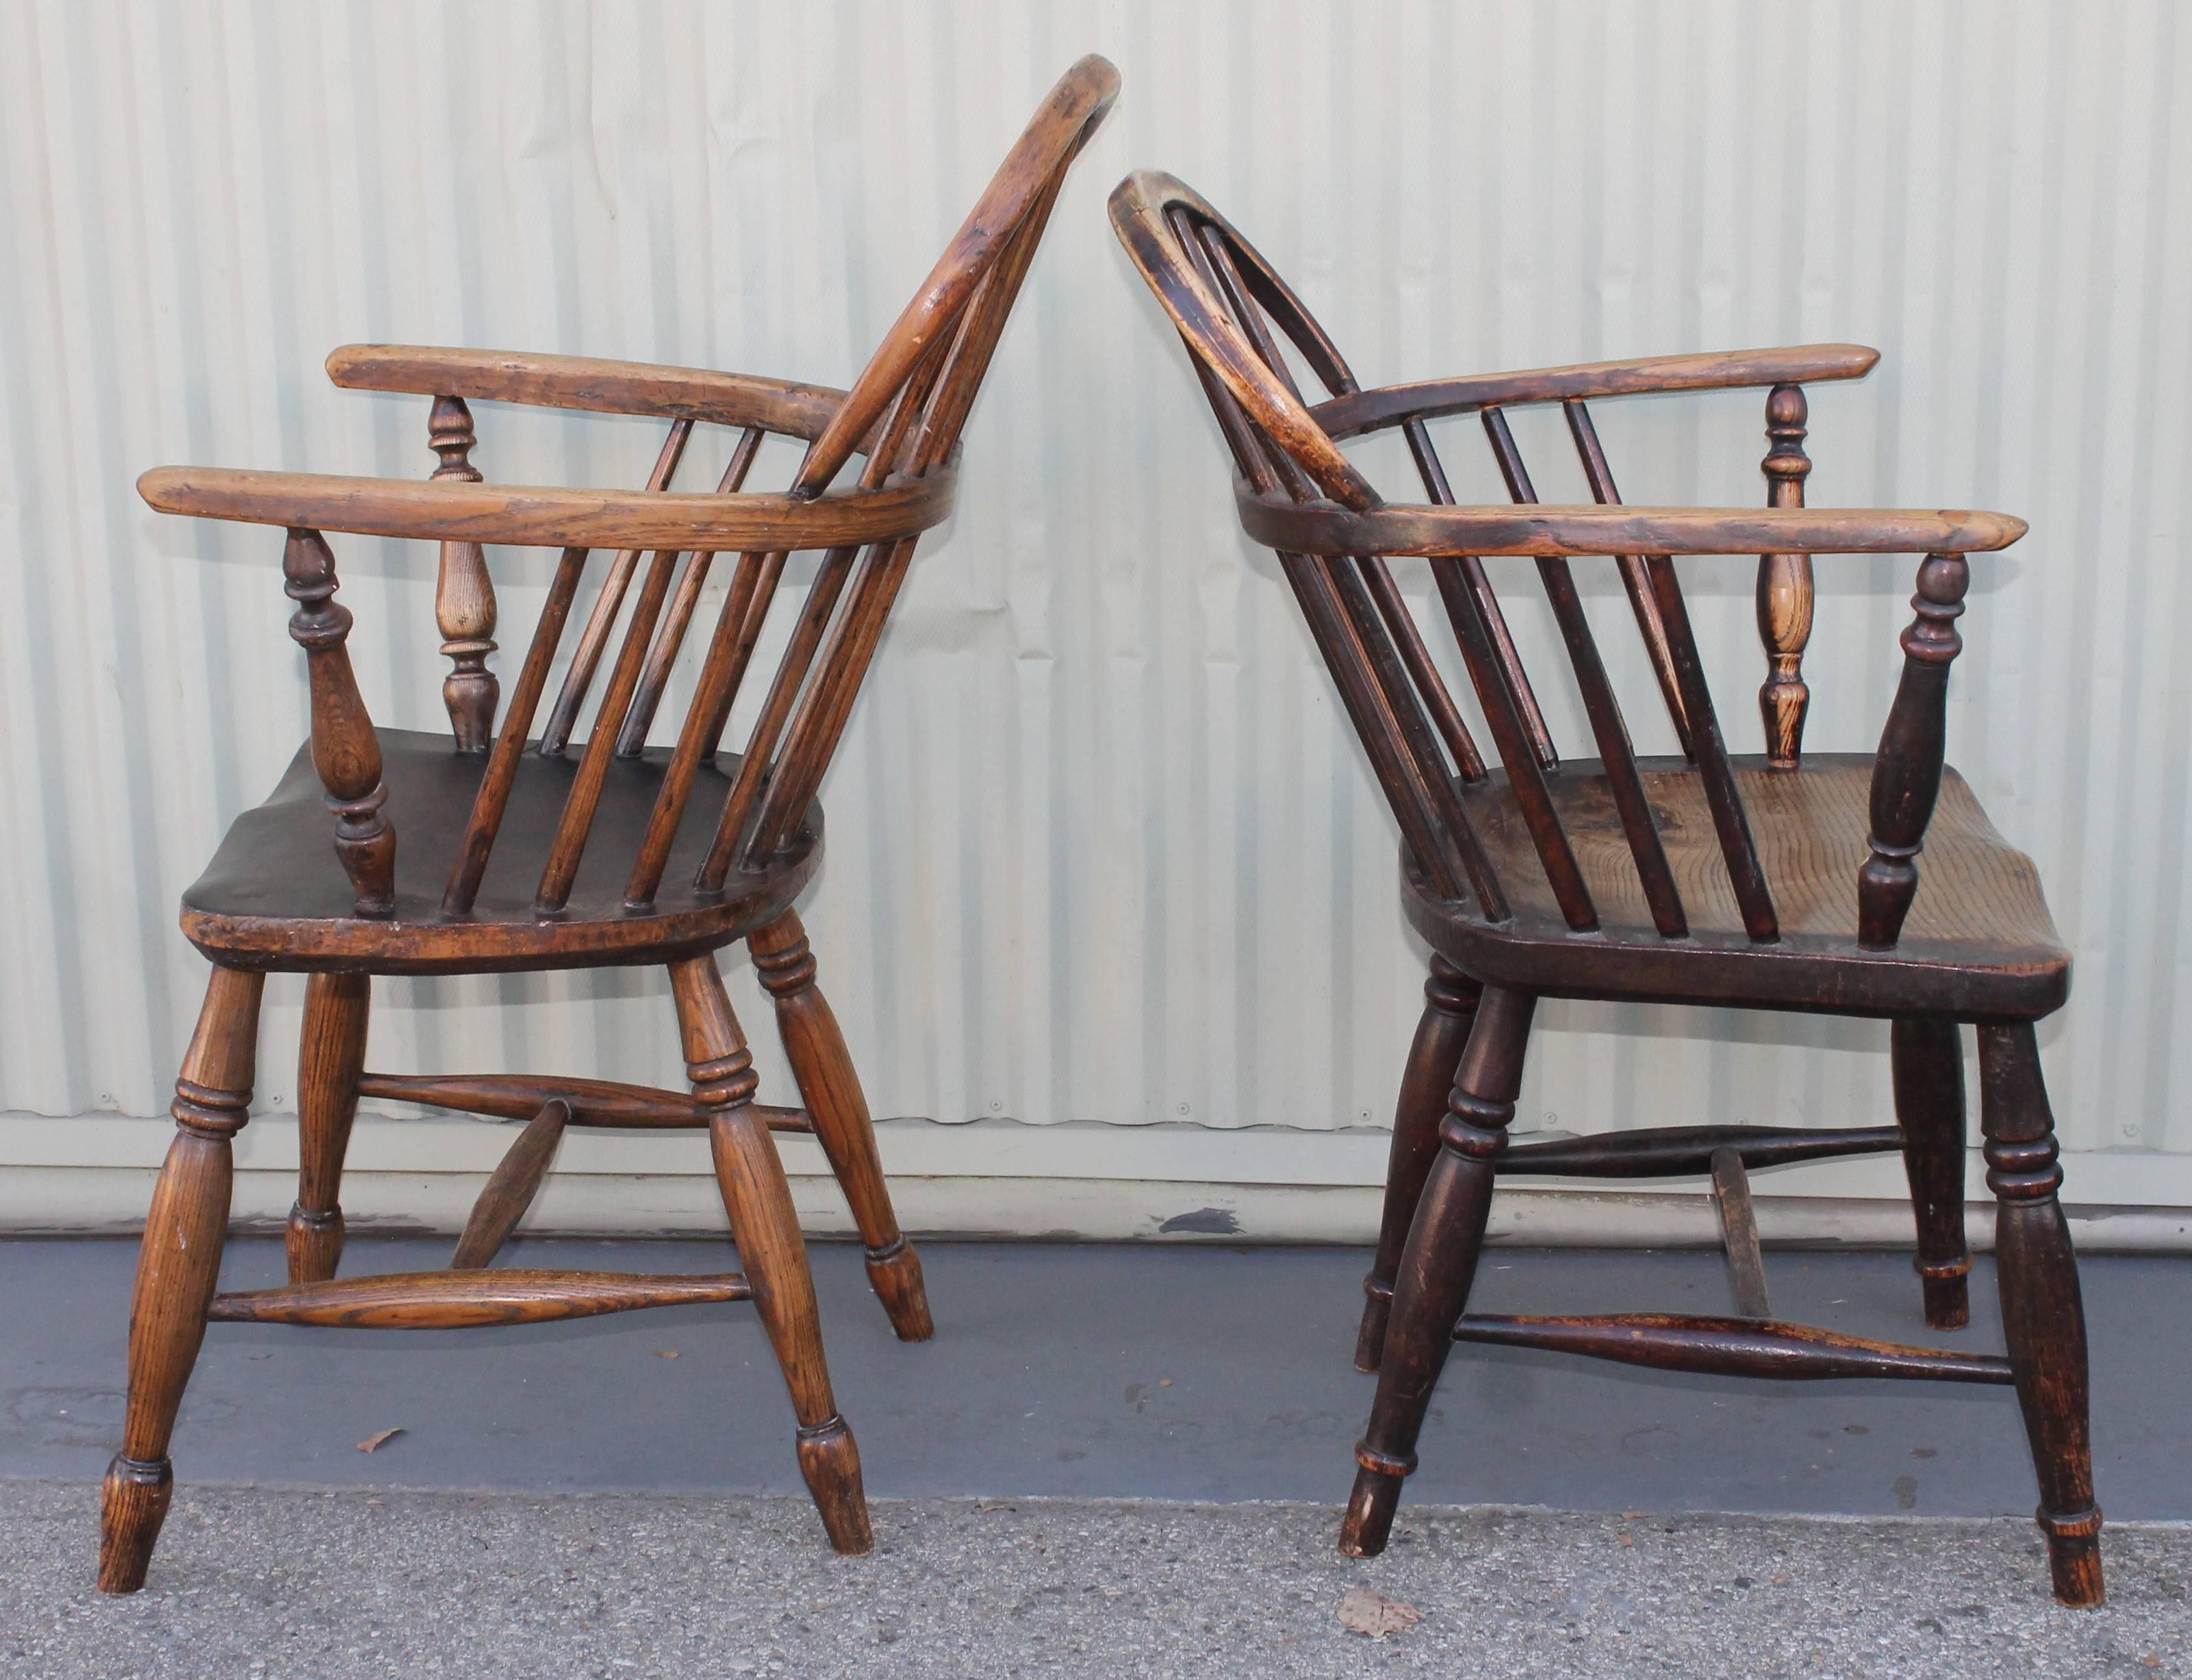 Wood Windsor Chairs, Early 19th Century English Assembled Collection / 4